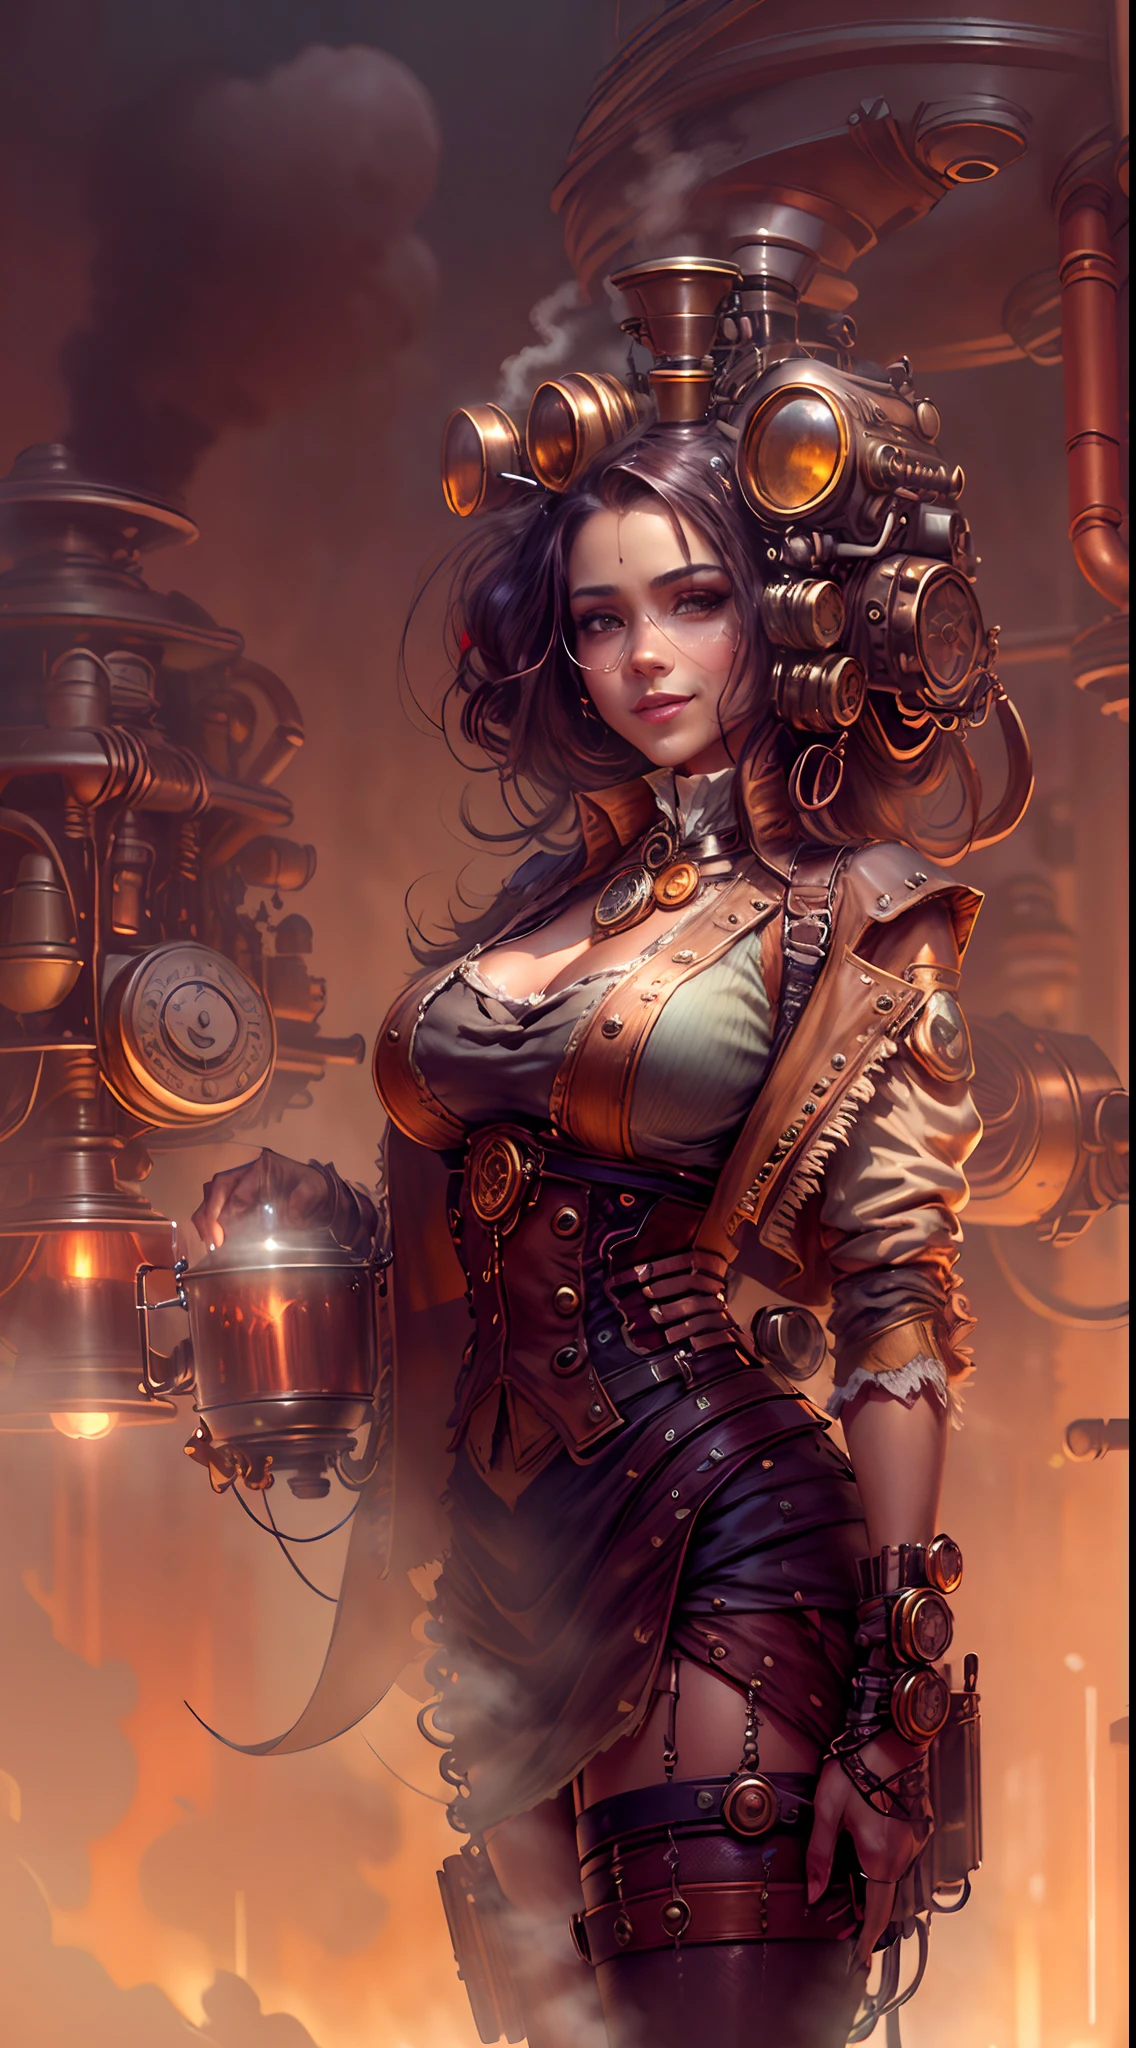 There's a sexzy 1woman with a steam-powered dusky skin, with big breast,Royal look,helmet, arte conceitual steampunk, sexzy full body view top to bottom, standing villan smile front view  neon light,dawn sky style,dark smoke fog background, arte steampunk digital, arte steampunk de alta qualidade, Wojtek FUS, arte digital steampunk, detailed wild steampunk illustration, Portrait of a gold and copper mechanical woman, arte steampunk, estilo de arte dieselpunk, cyberpunk steampunk, estilo de fantasia steampunk, Arte digital altamente detalhada em 4k, sci-fi steampunk